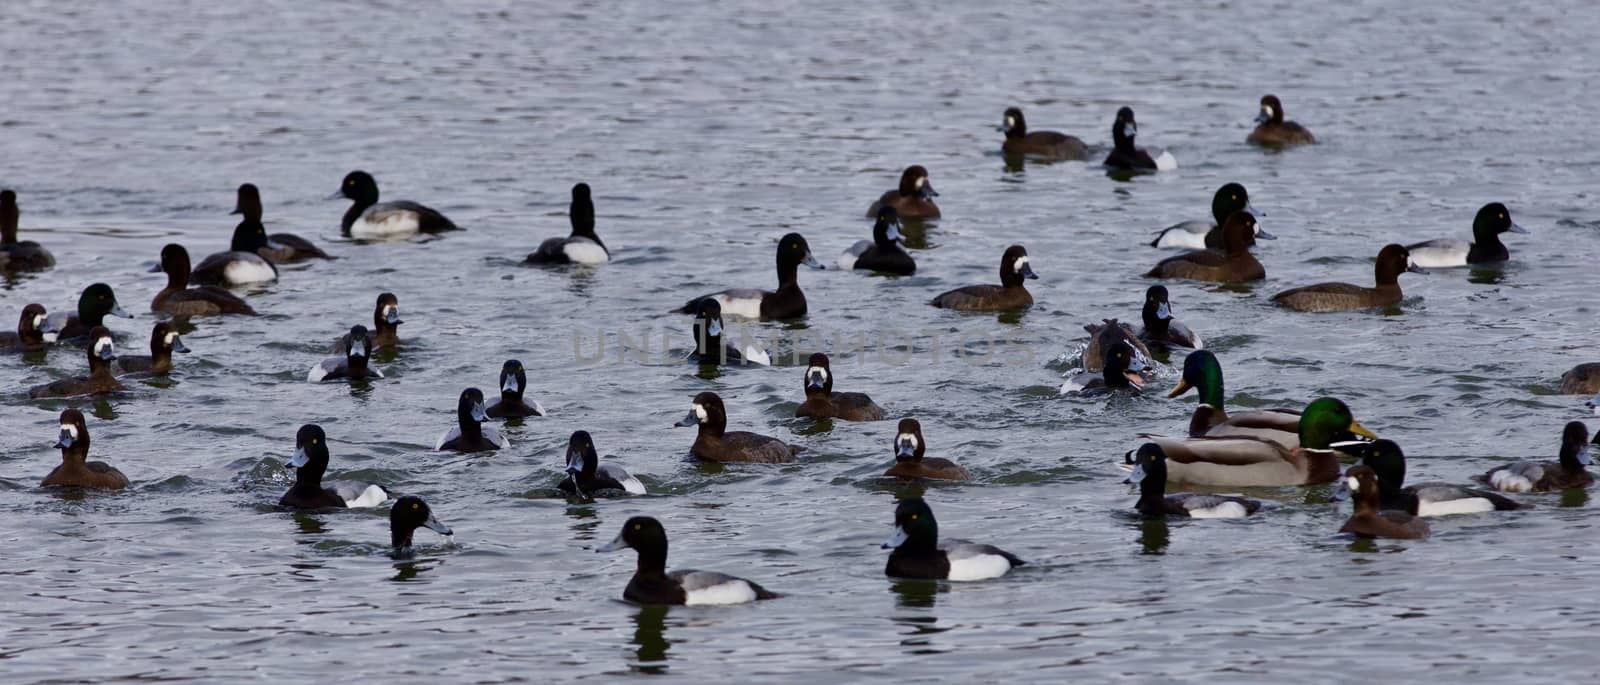 Beautiful photo of a swarm of ducks in the lake by teo